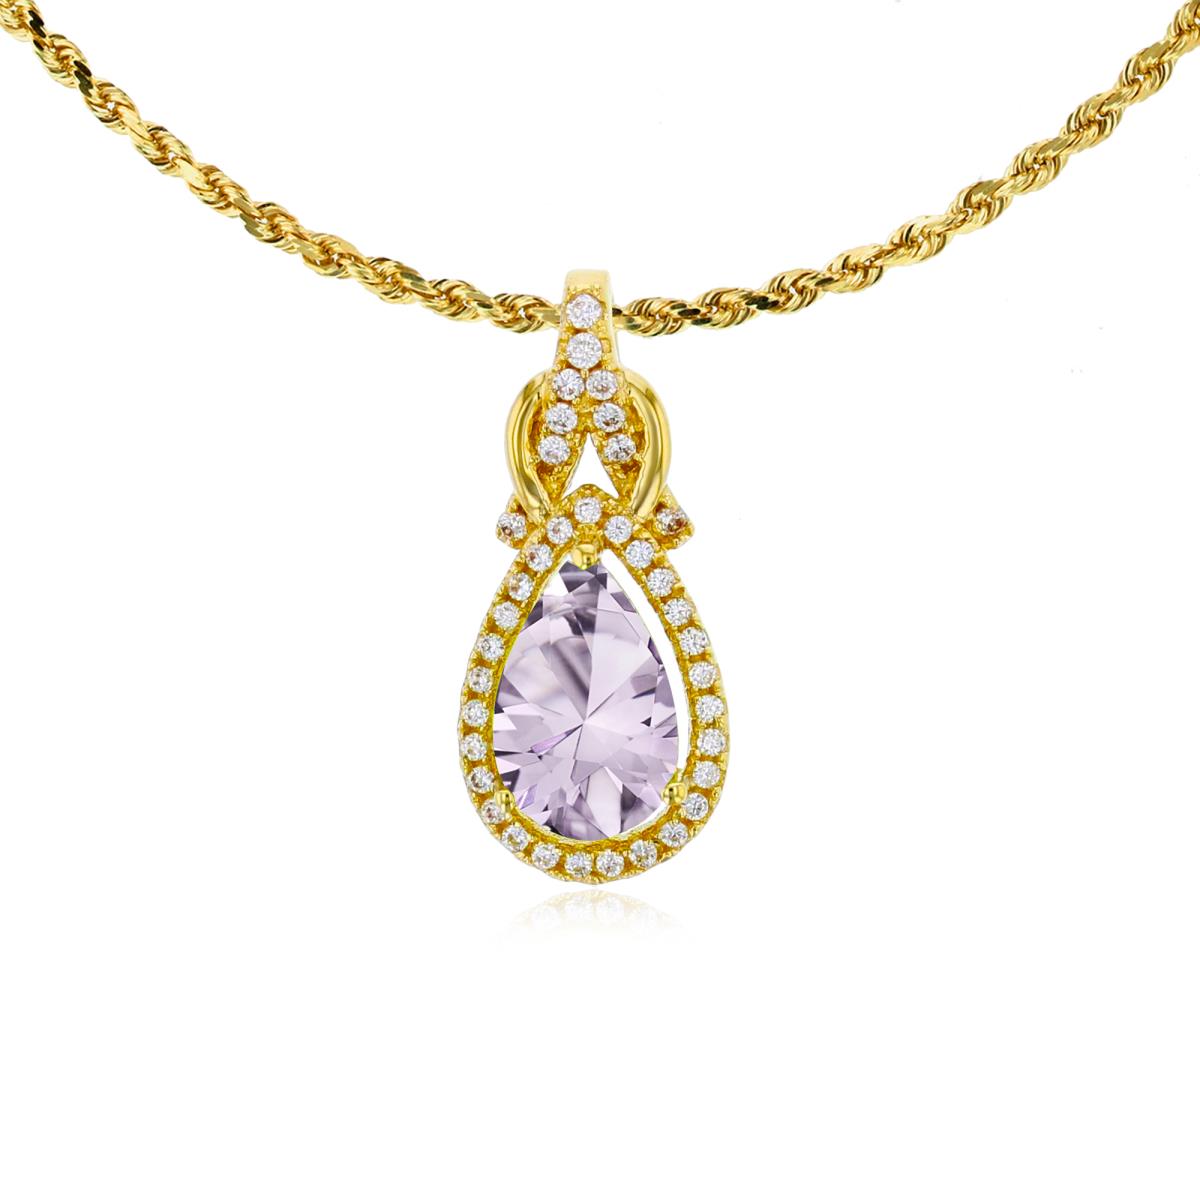 10K Yellow Gold 8x5mm Pear Cut Rose De France & 0.11 CTTW Rnd Diamond Knot 18" Rope Chain Necklace